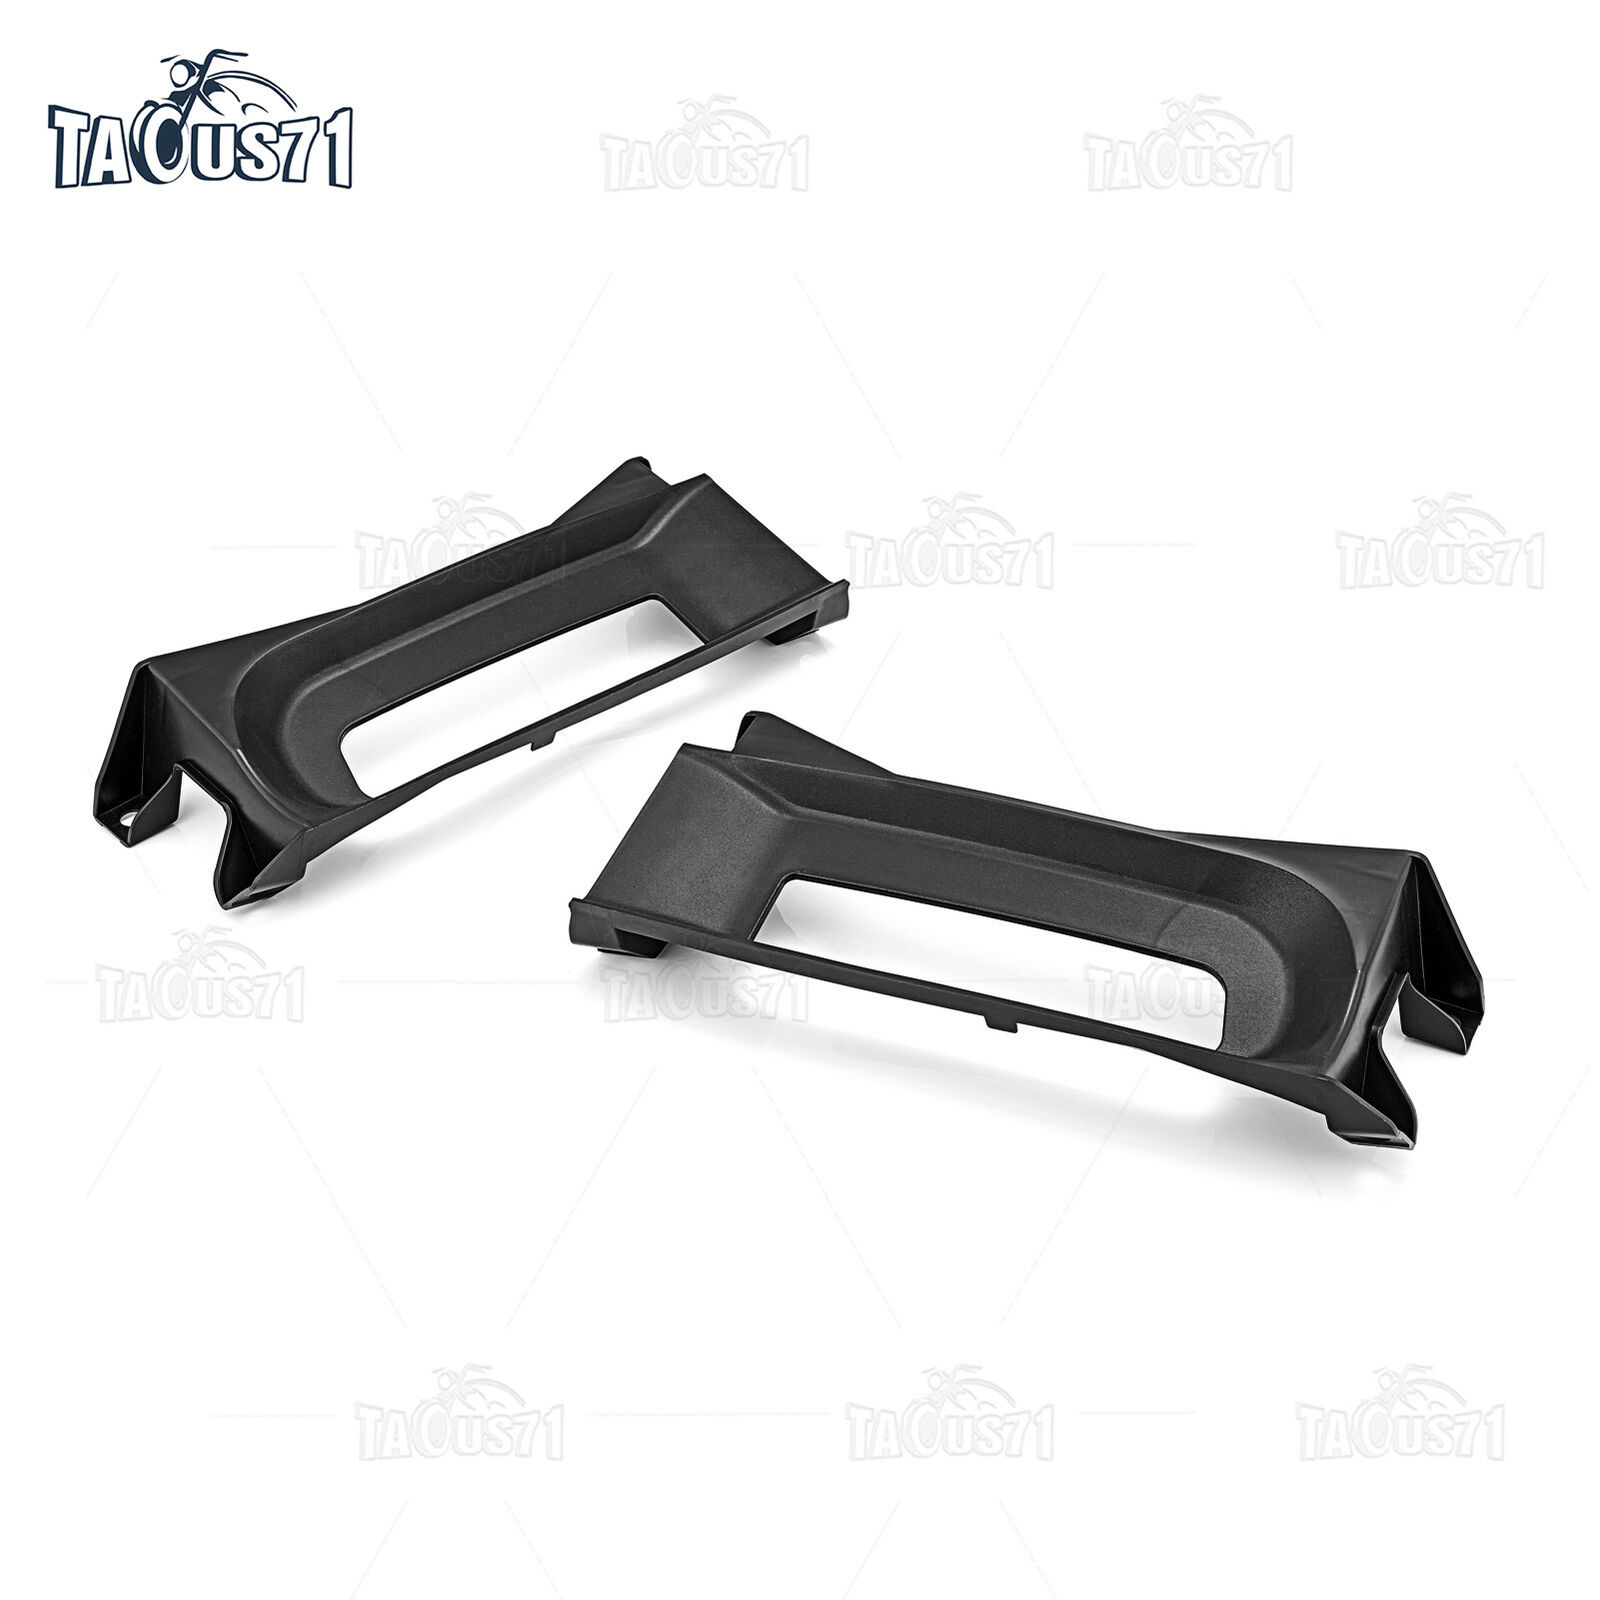 Fits Ram 1500 2013-2014 2015 2016 2017 18 Left & Right Front Tow Hooks / Bezels